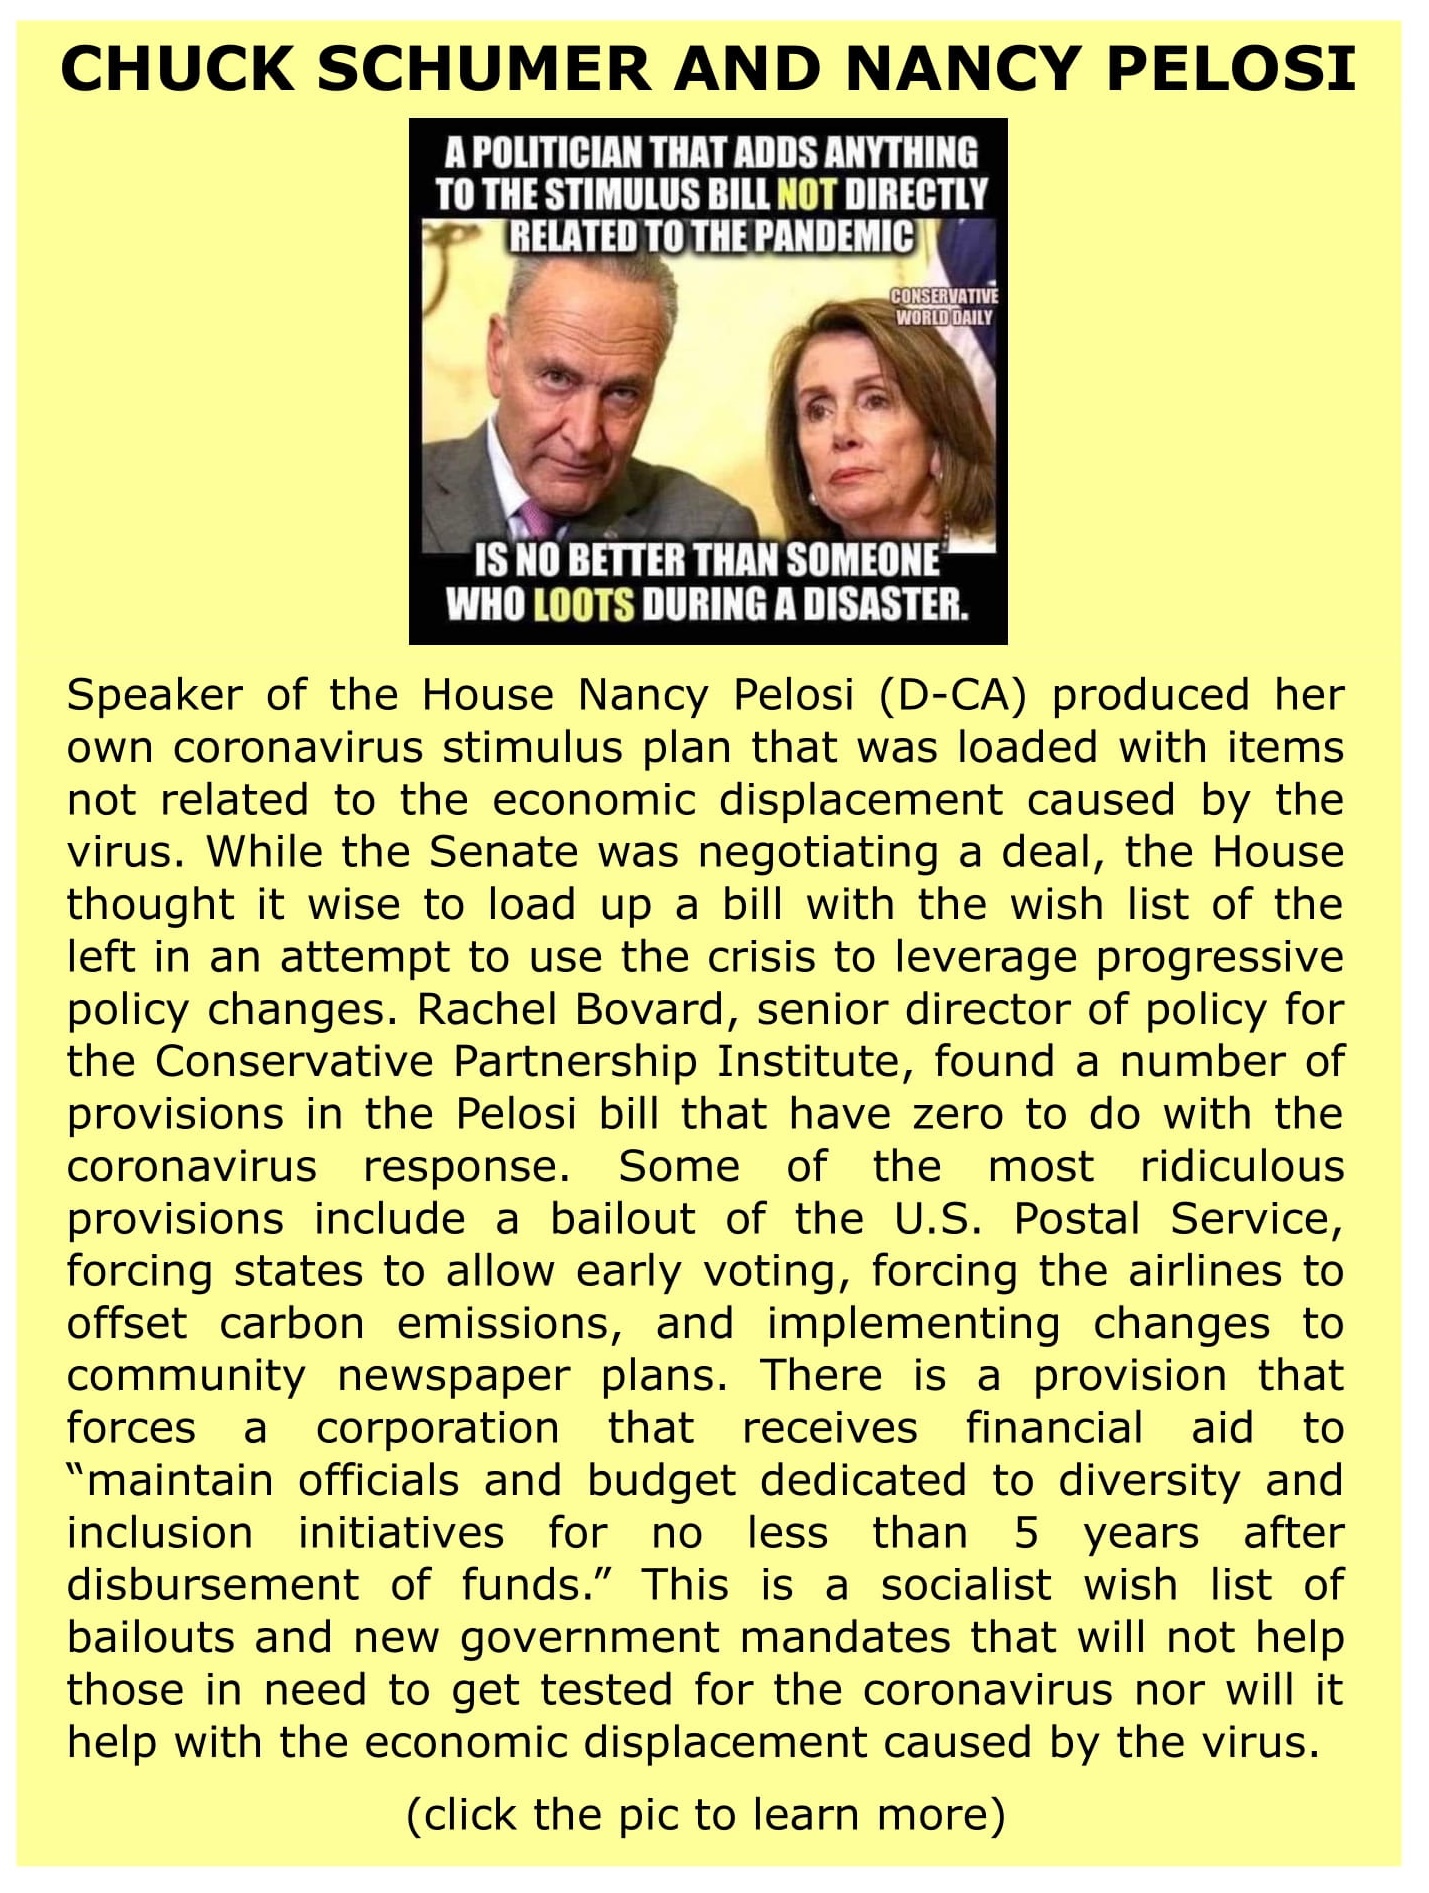 Commies Schumer and Pelosi